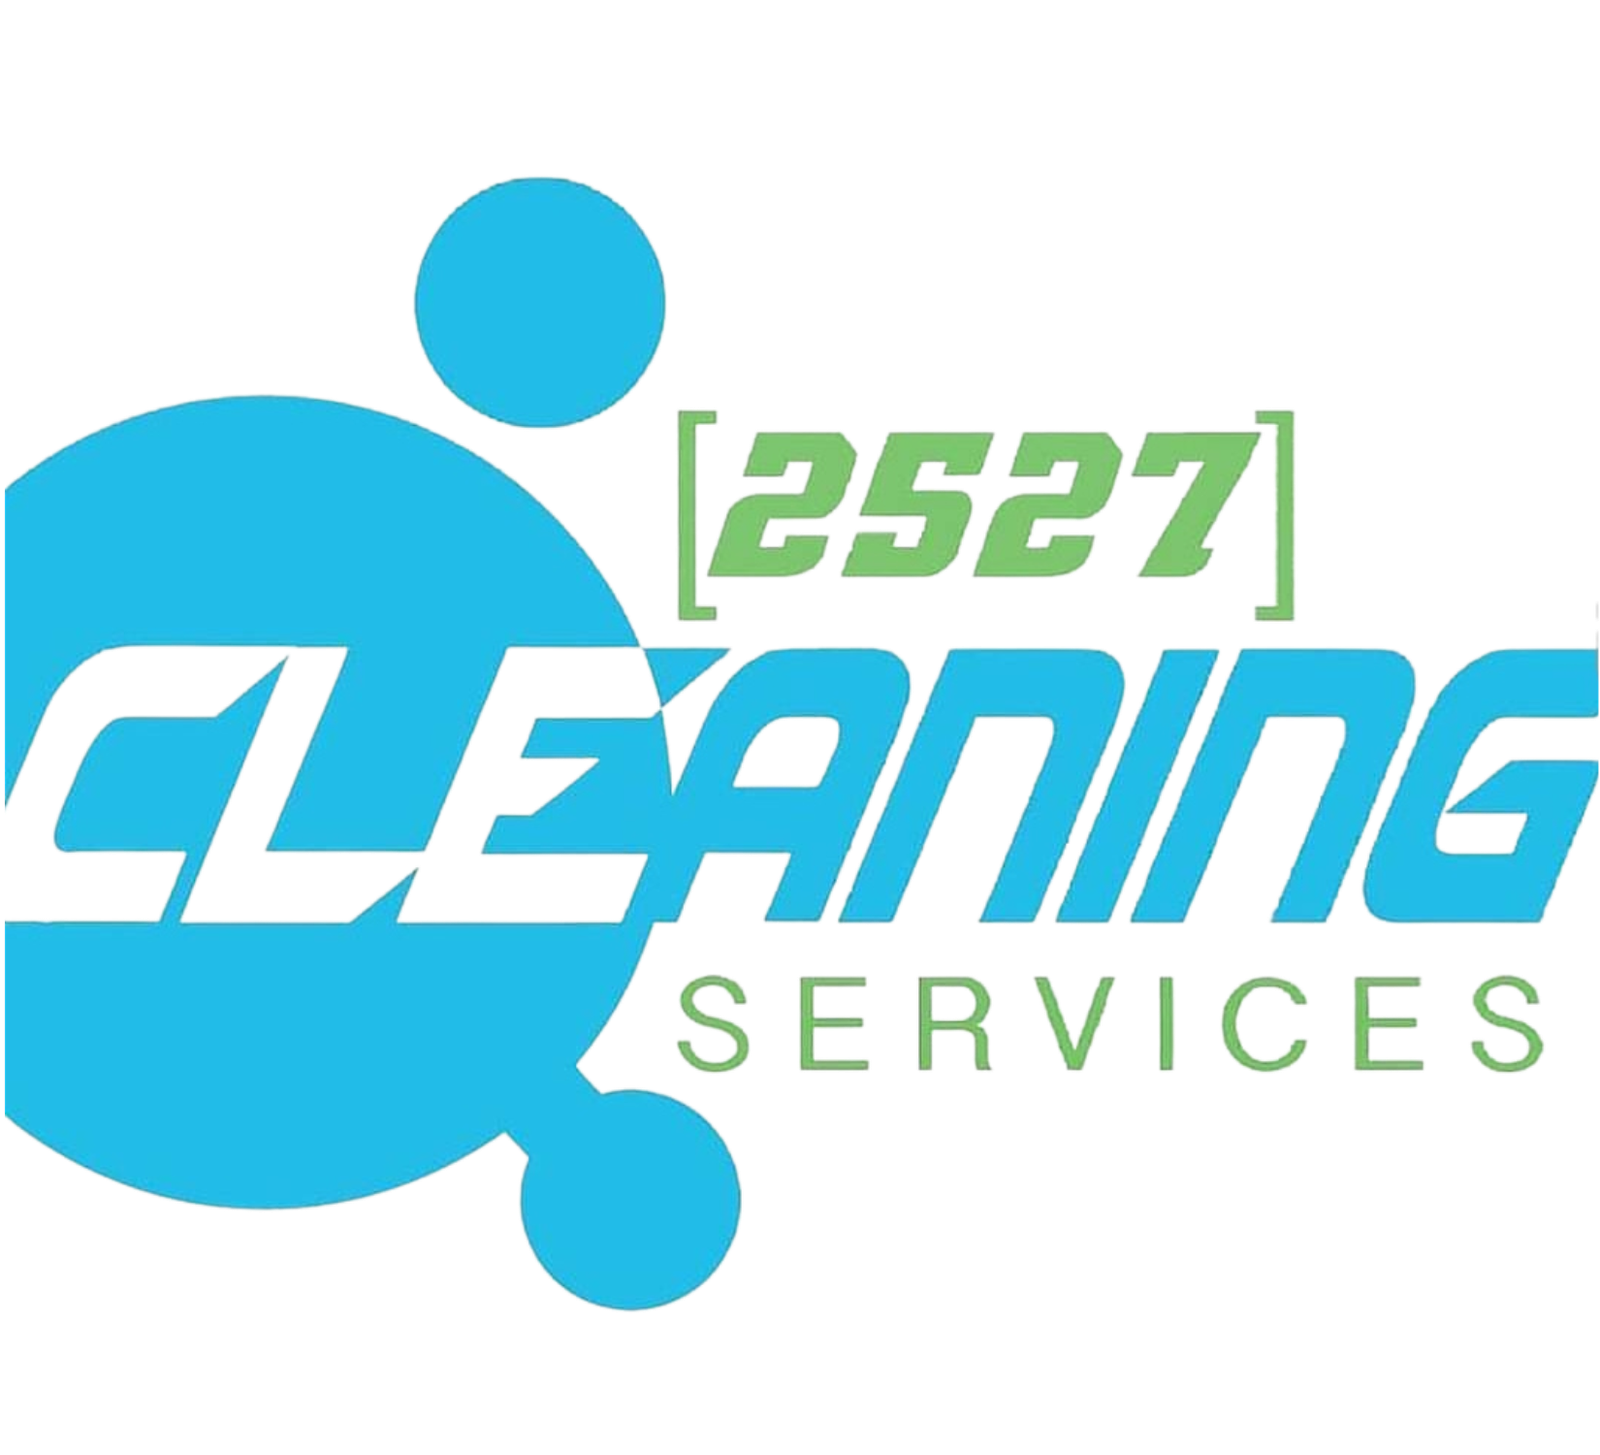 2527 Cleaning Services